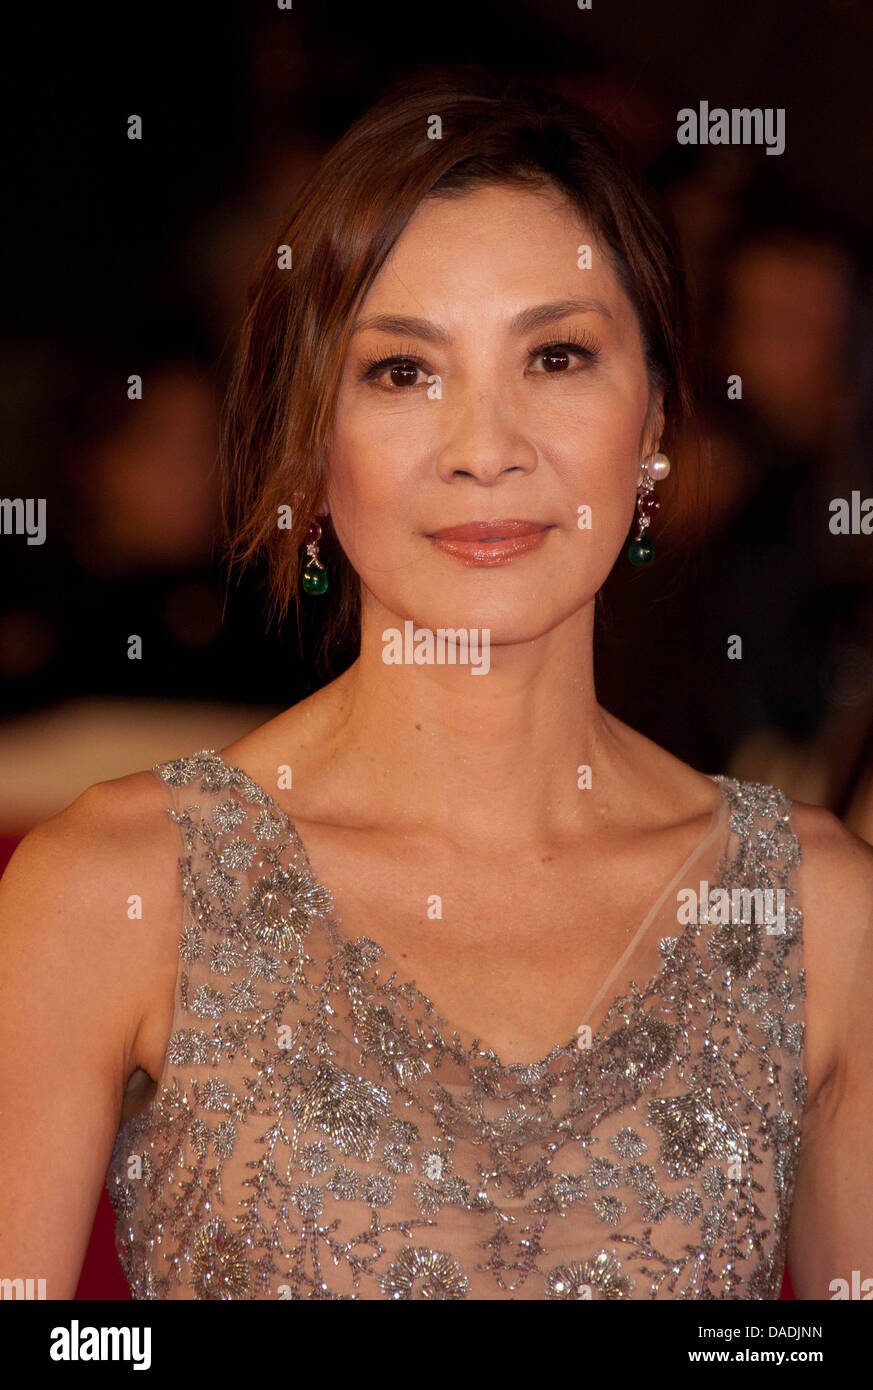 Actress Michelle Yeoh (wearing a Valentino dress and jewelry by Bulgari) attends the premiere of 'The Lady' during the 6th International Rome Film Festival at Auditorium Parco Della Musica in Rome, Italy, on 27 October 2011. Photo: Hubert Boesl Stock Photo